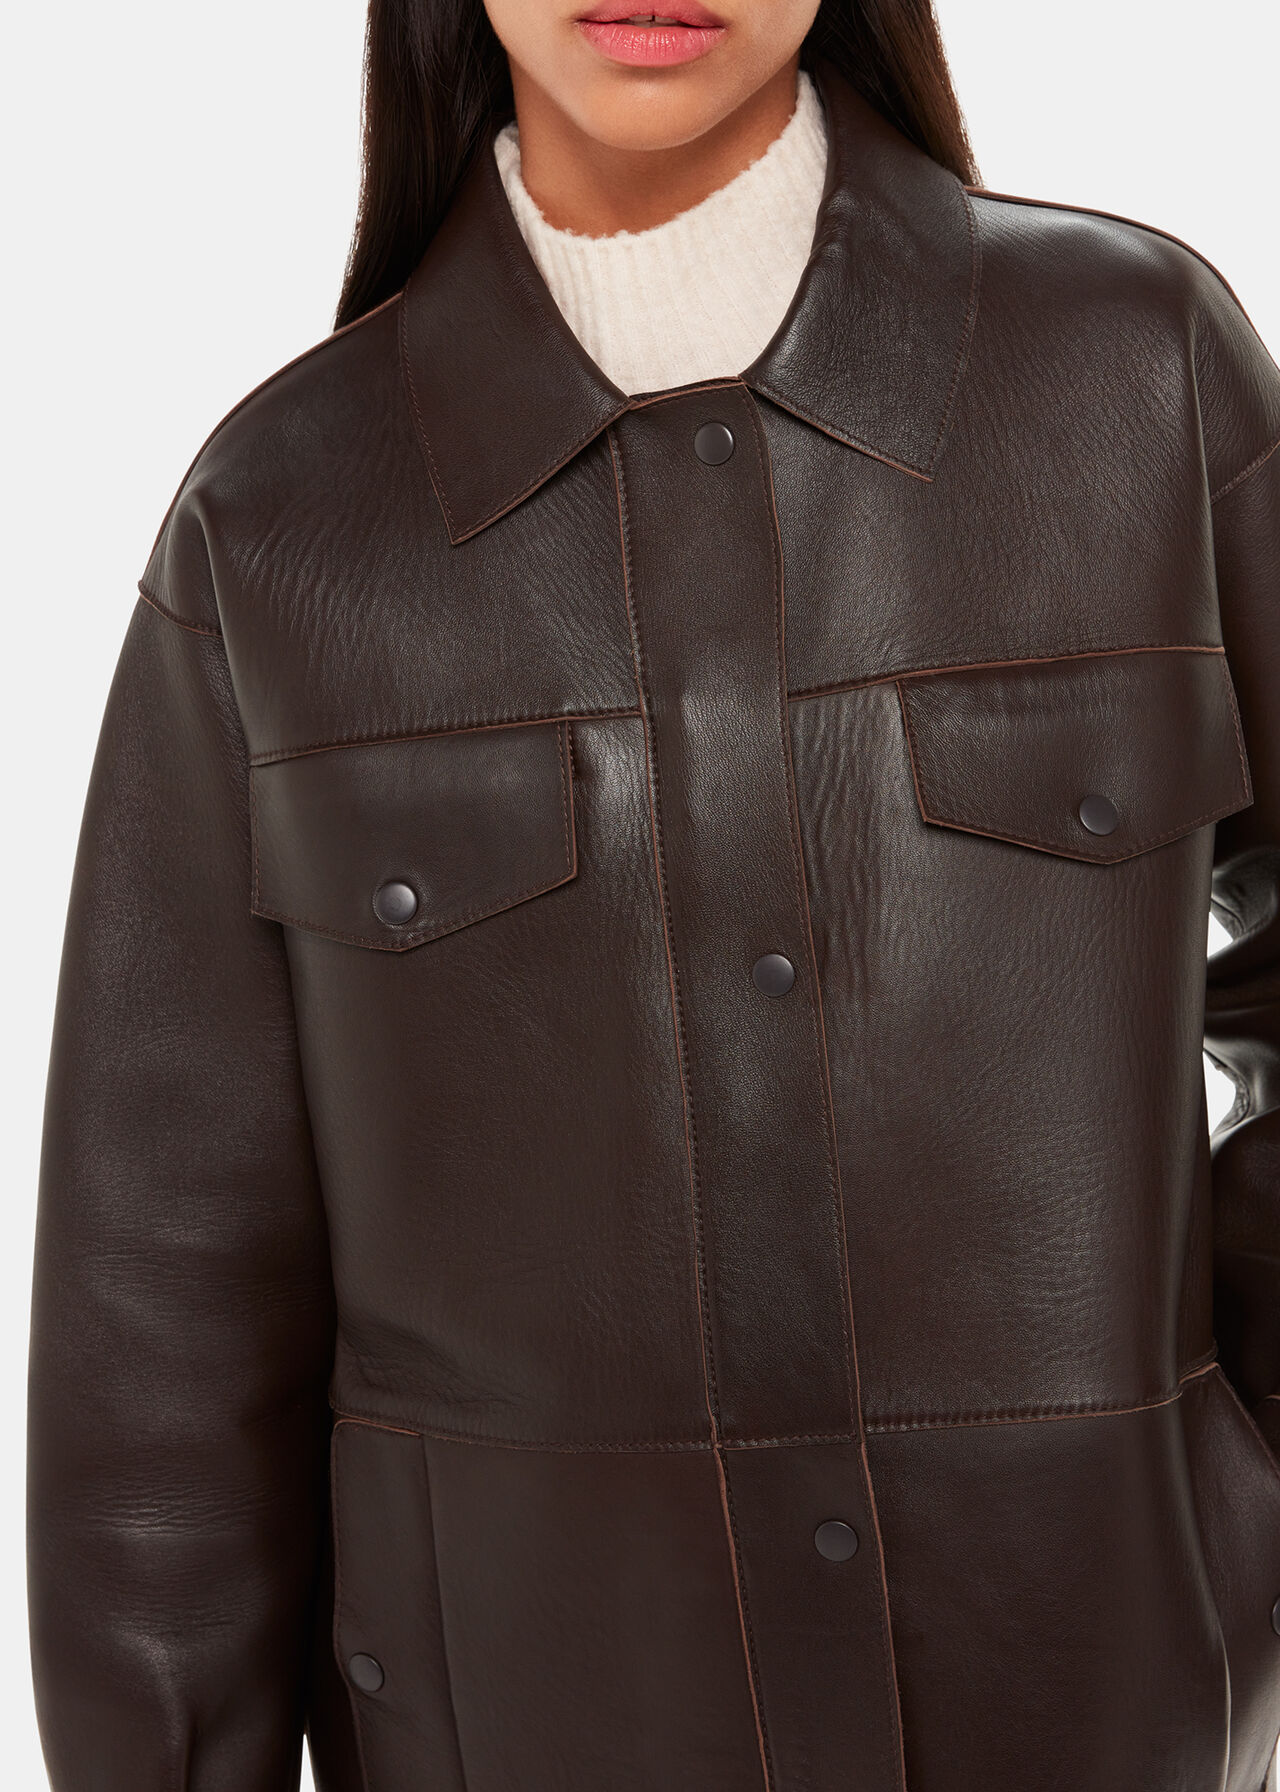 Clean Bonded Leather Jacket